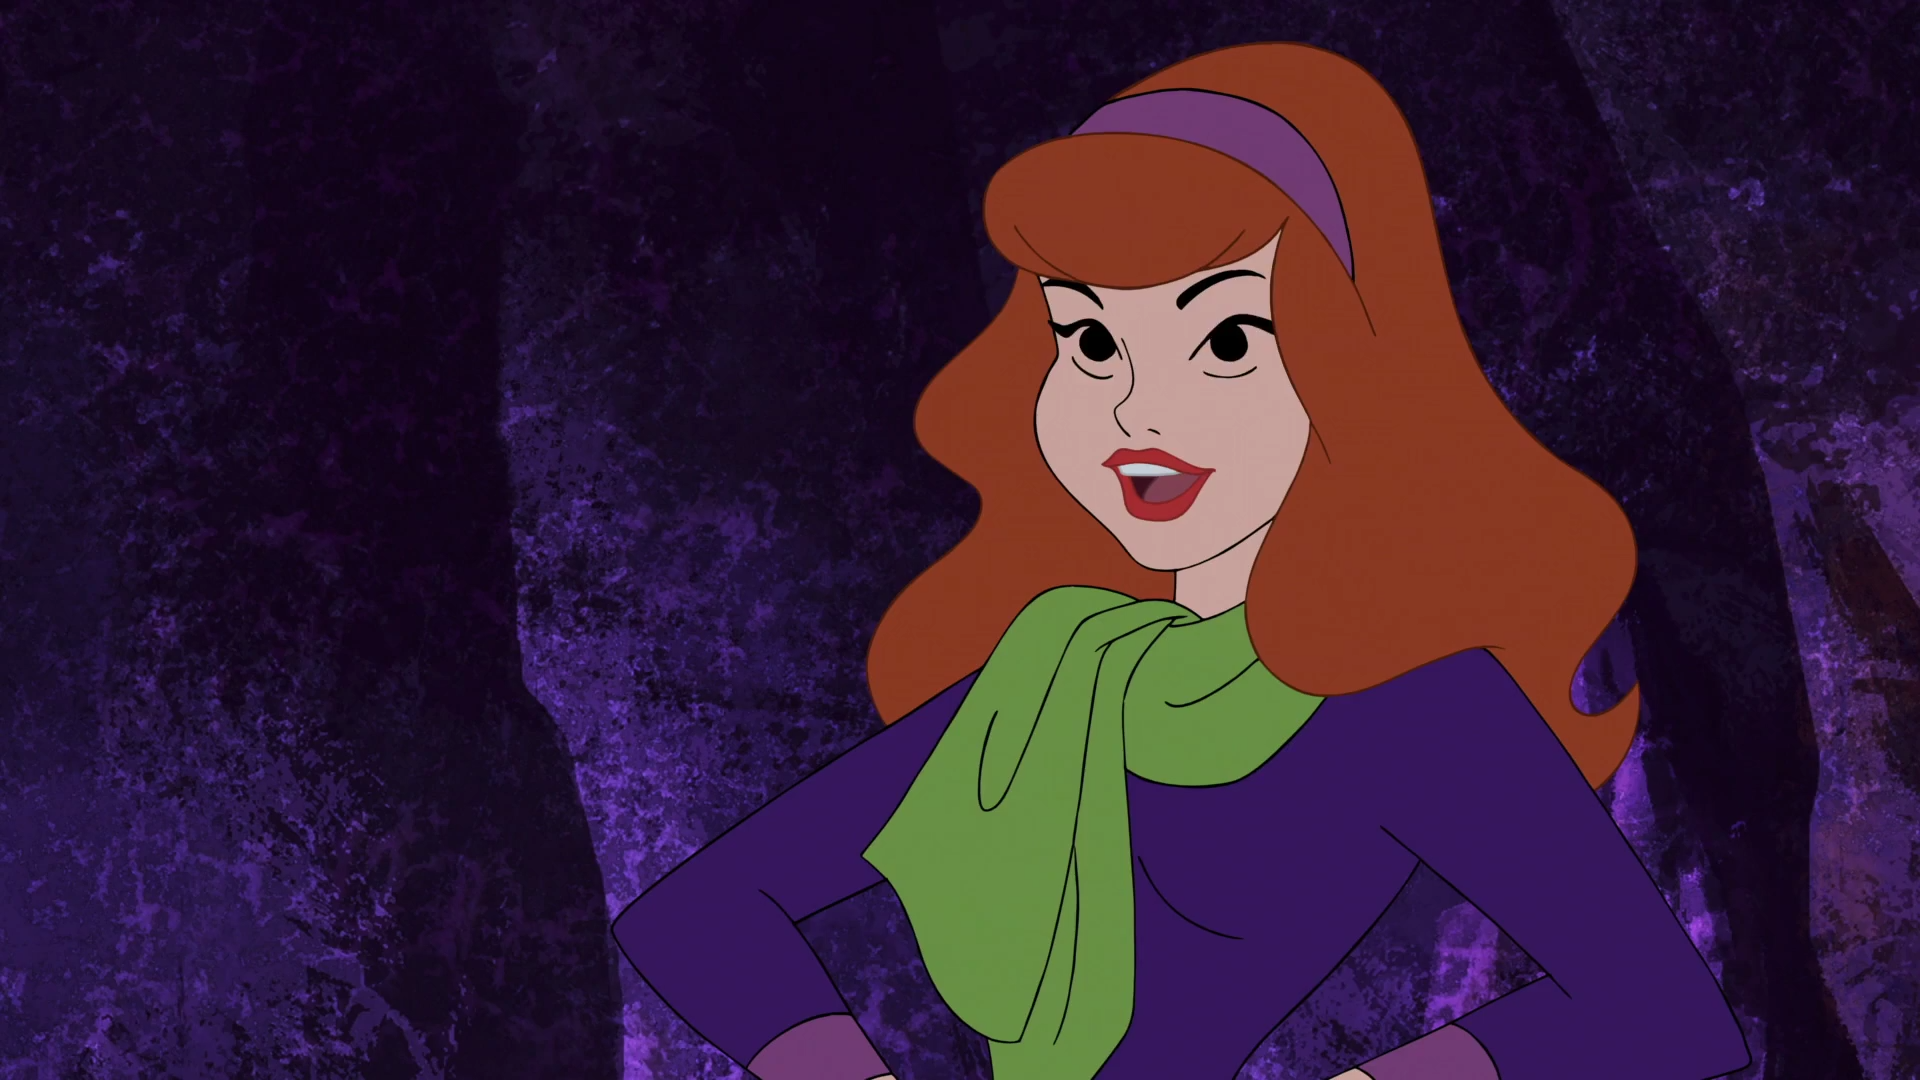 Daphne Whats New Scooby Doo Whats New Scooby Doo Box Office Buz Paige Sheppard